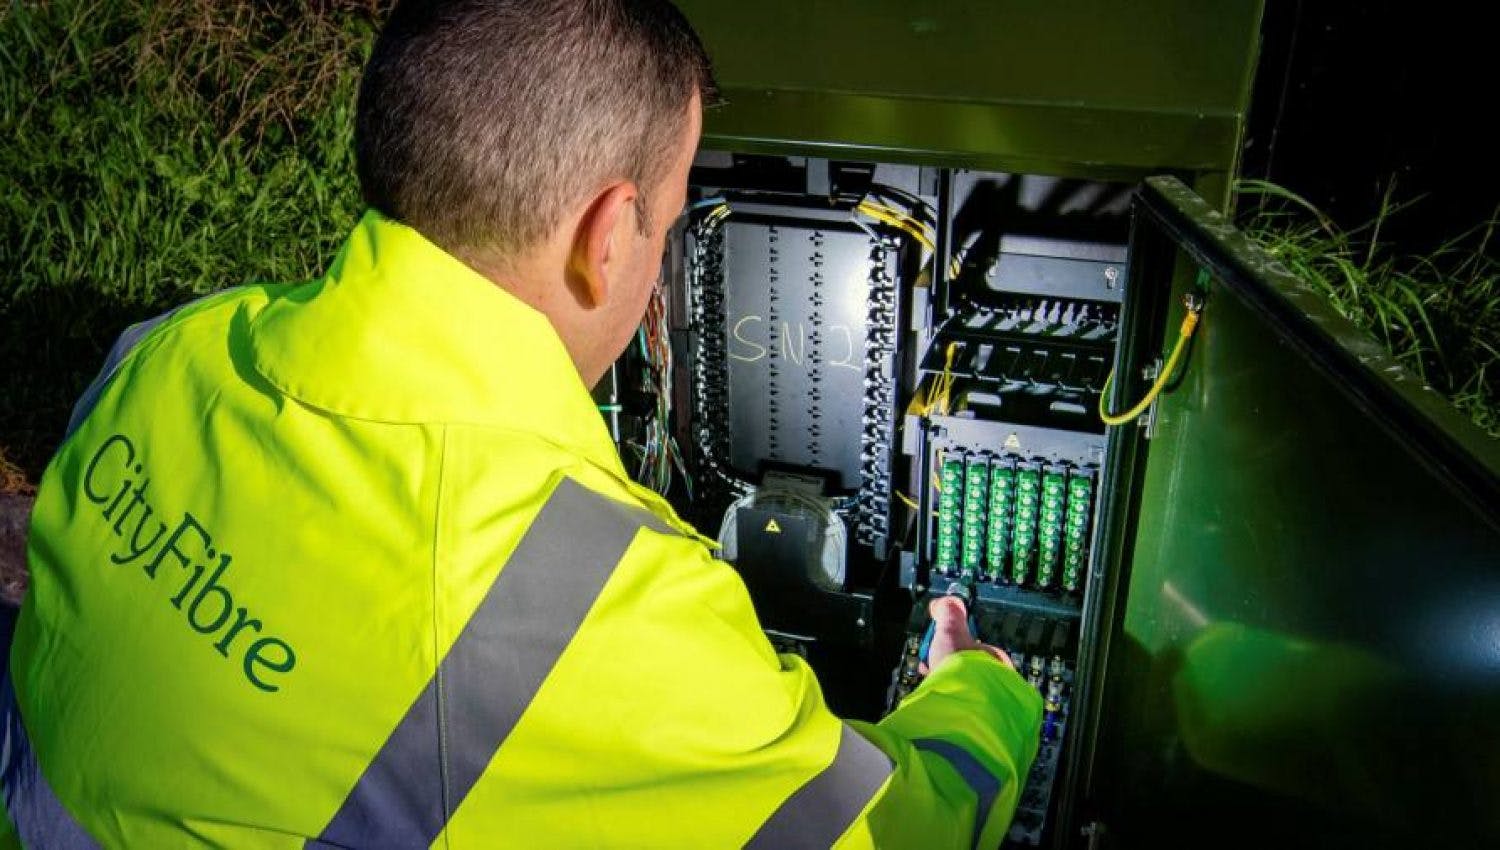 CityFibre's Fiber Optic Worker using Deepomatic's Computer Vision Systems on an electricity panel